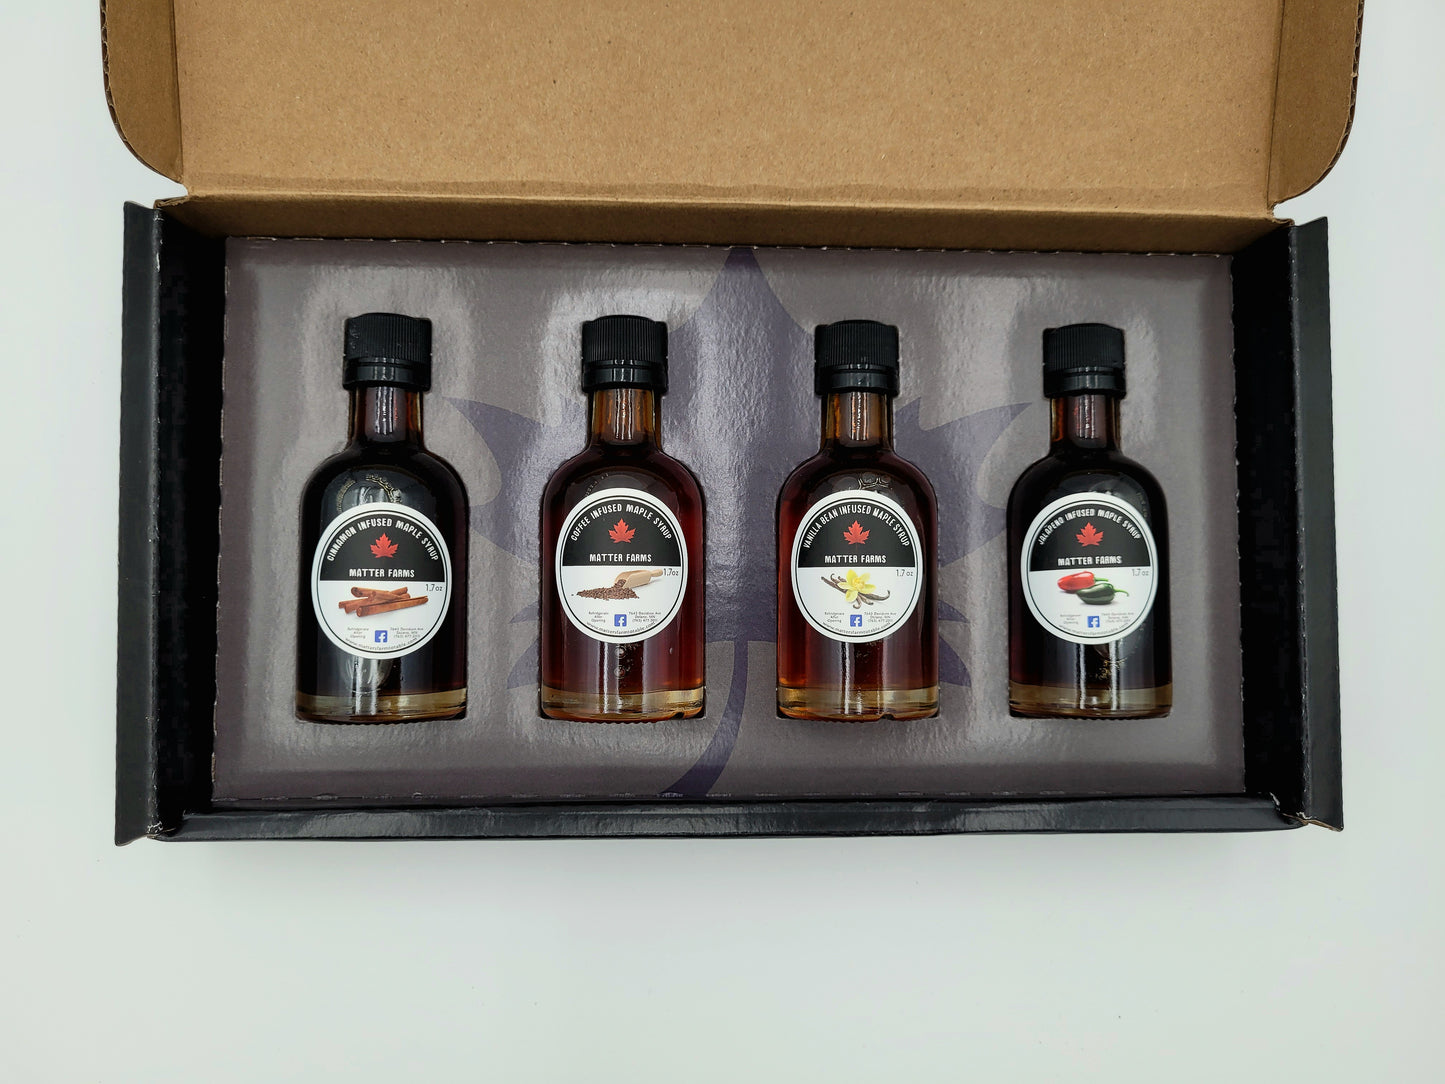 Gift/Sample 4 Pack - Infused Maple Syrups, Cinnamon, Coffee, Vanilla, and Jalapeno